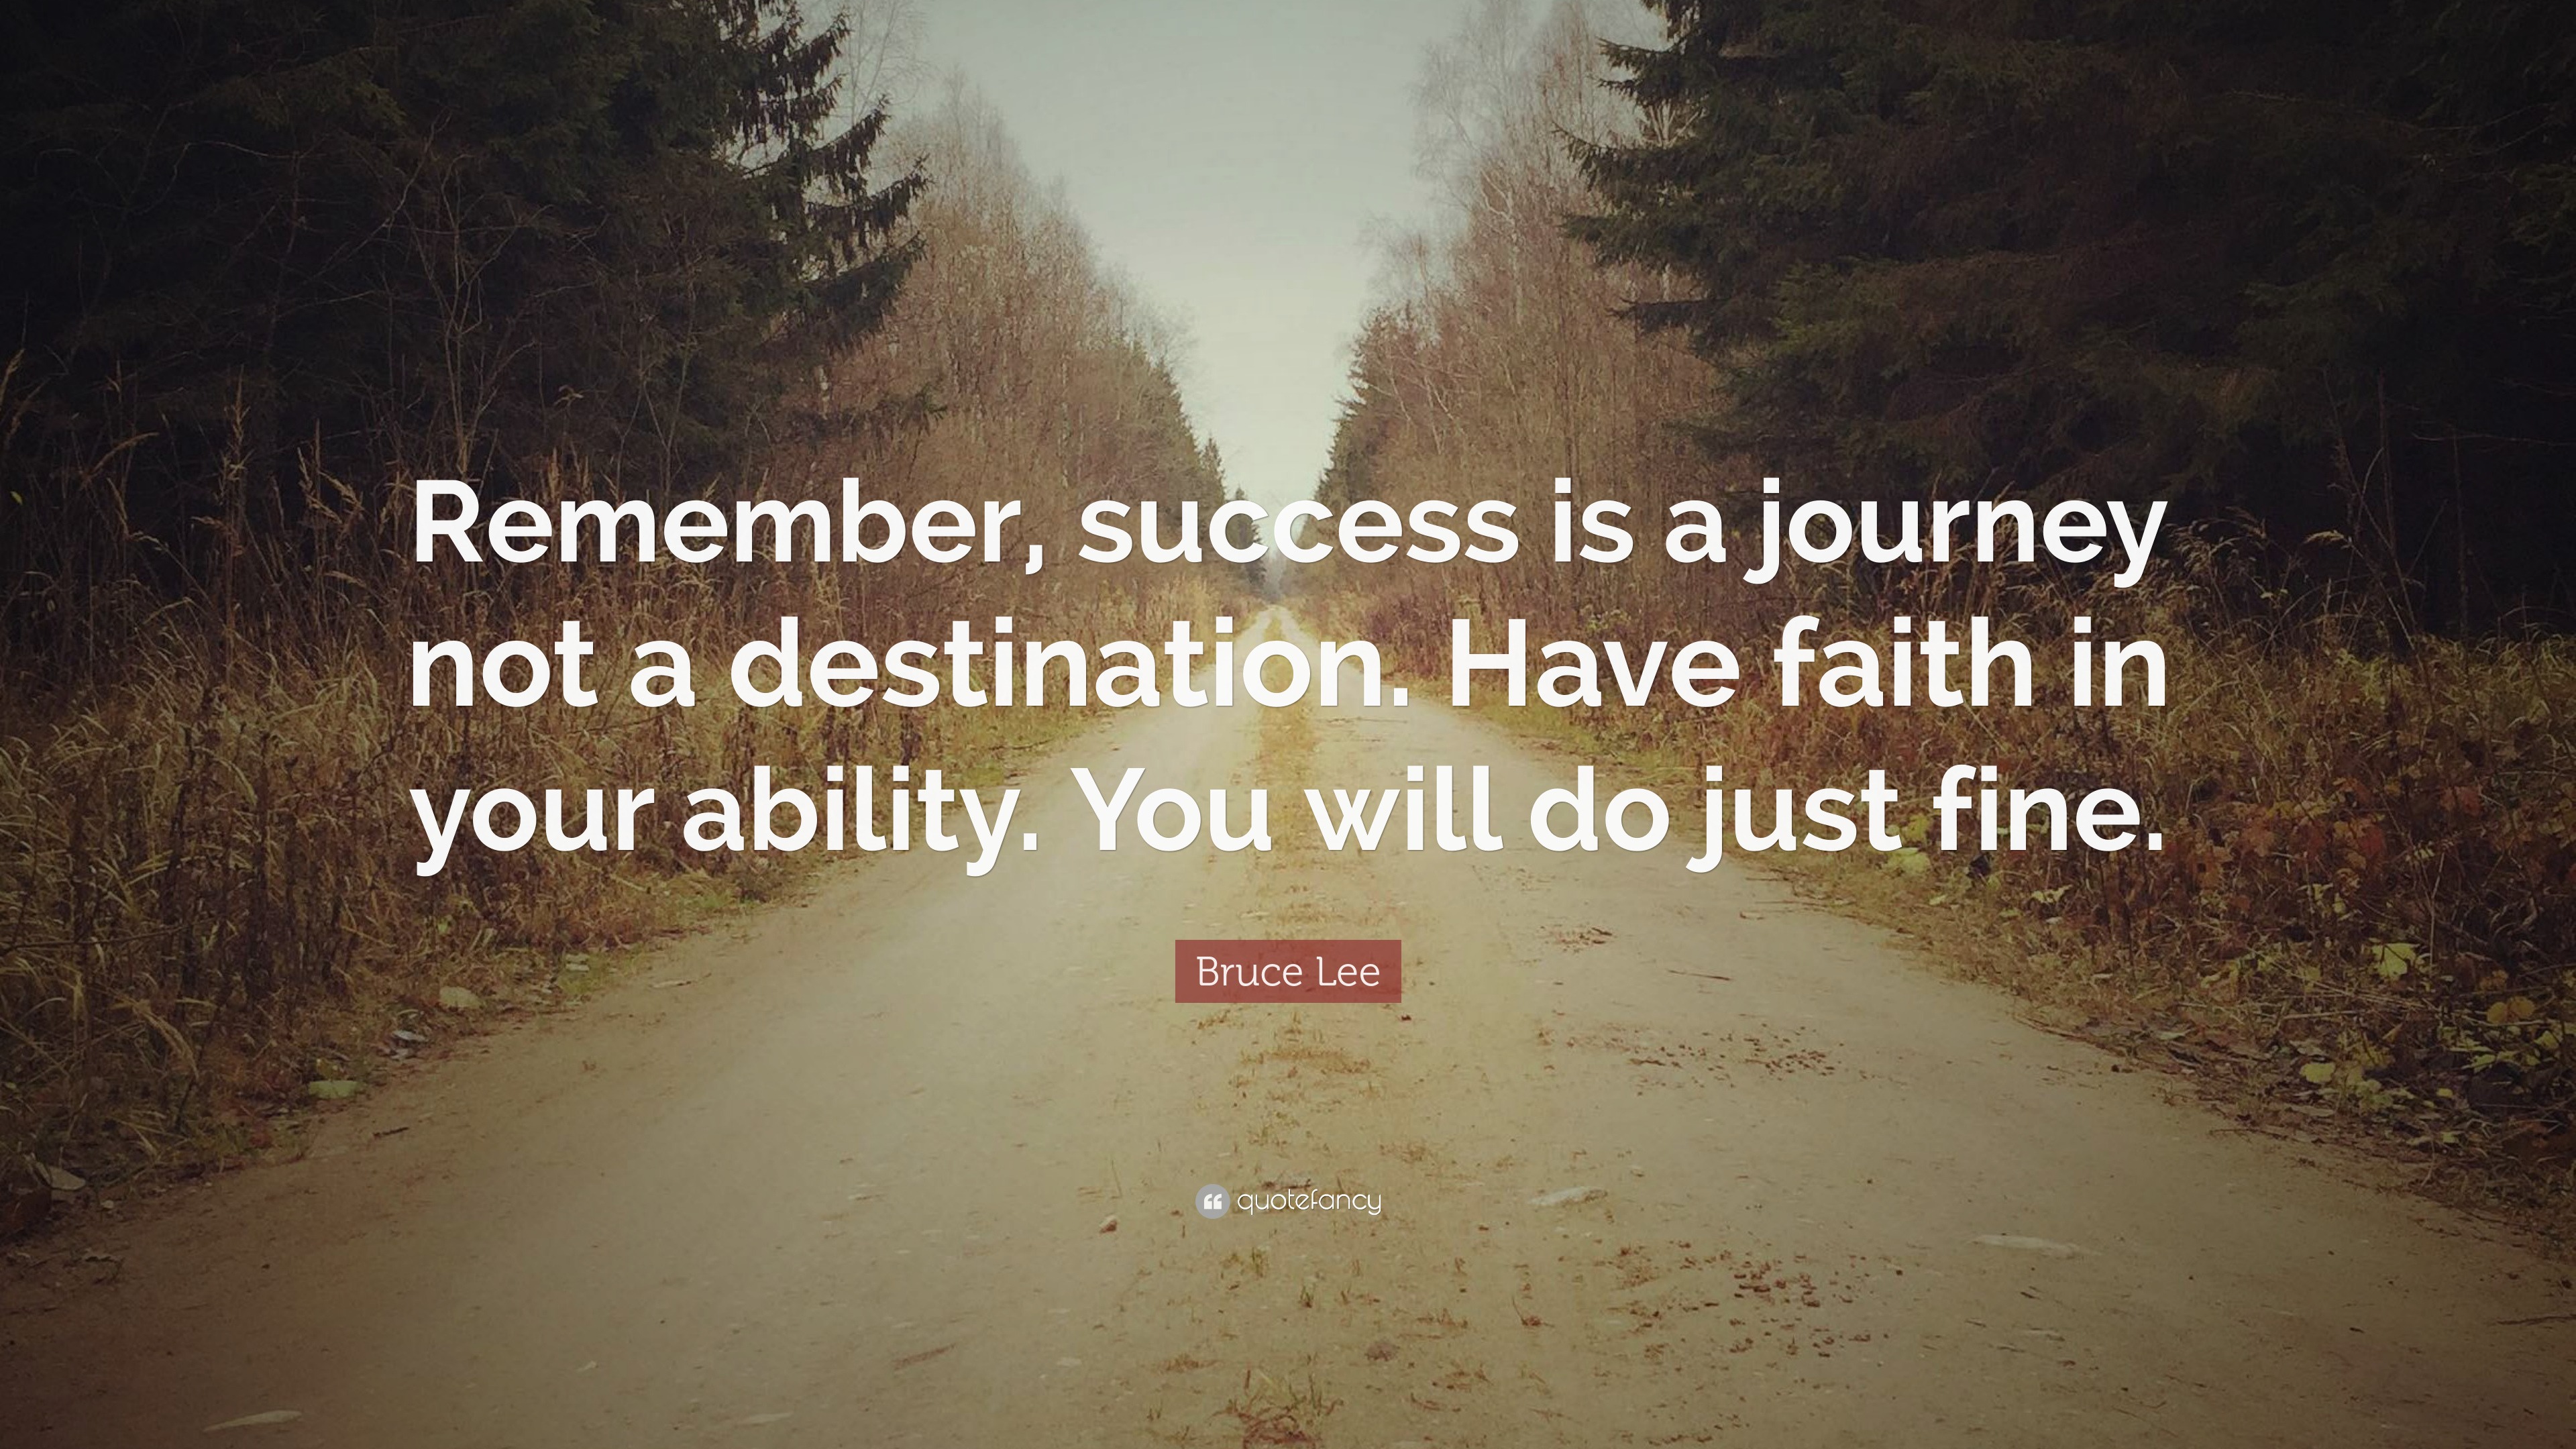 Bruce Lee Quote “Remember, success is a journey not a